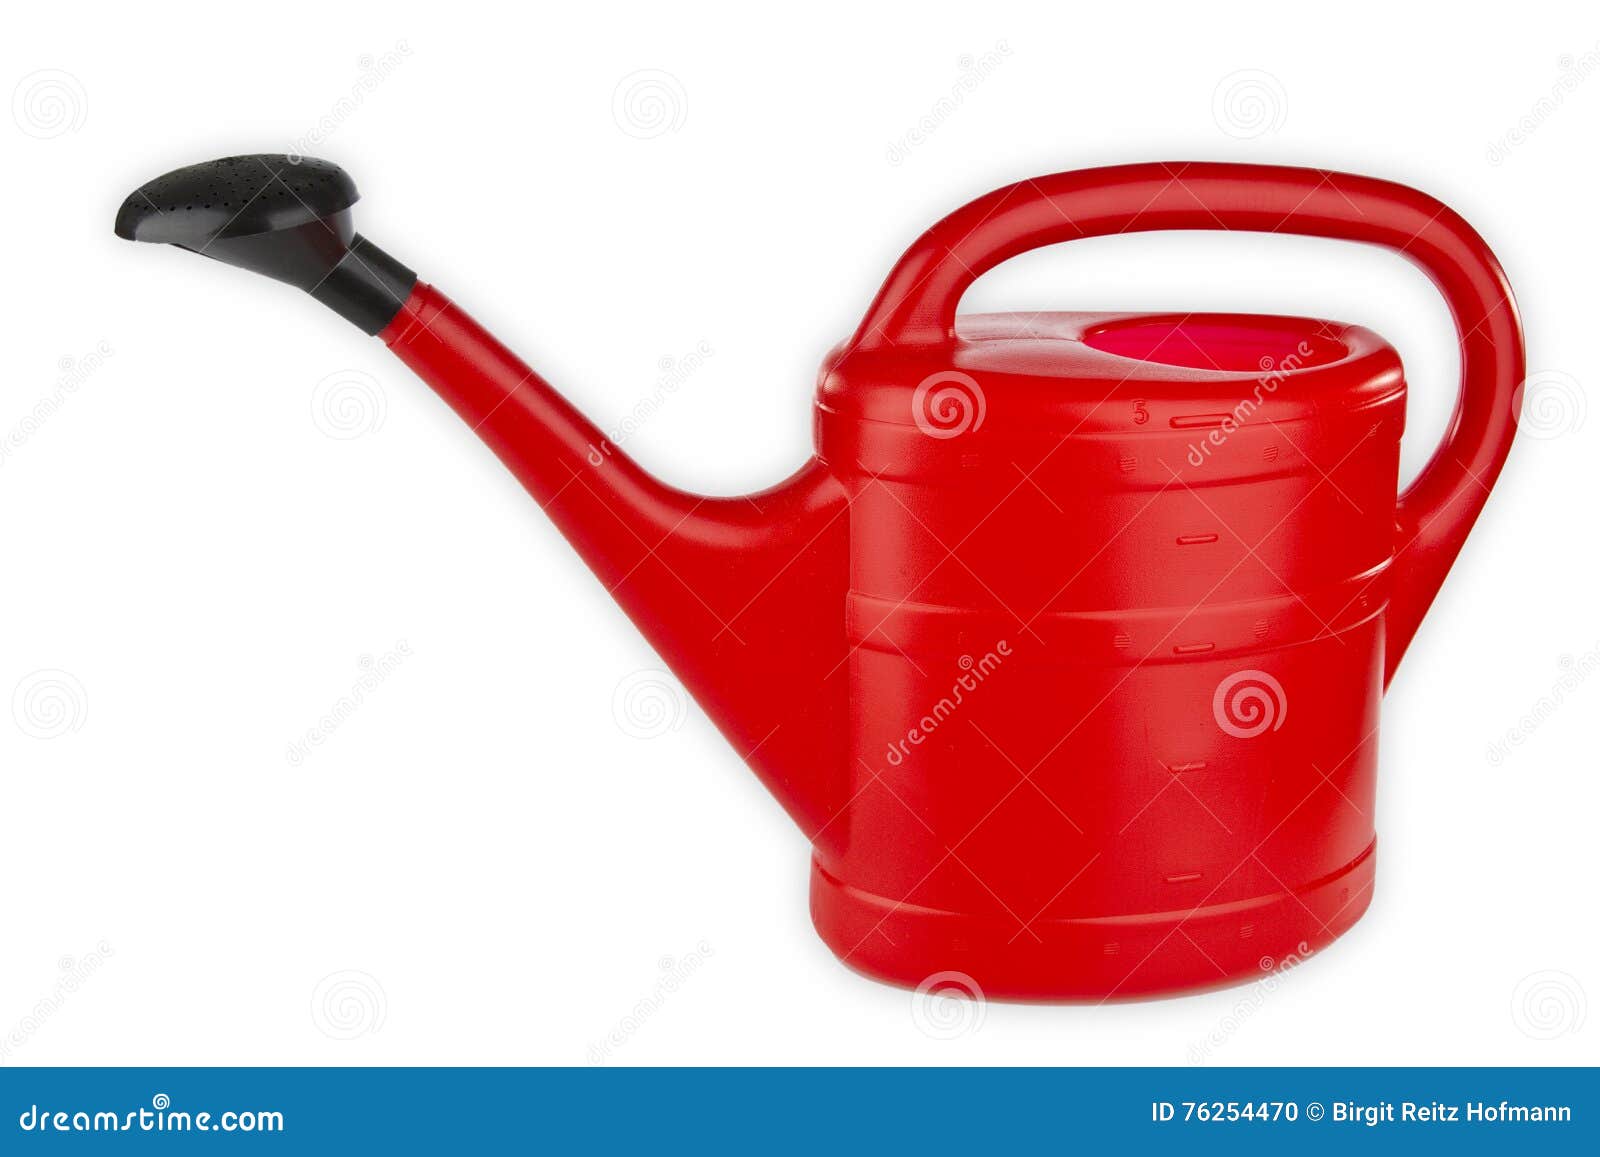 Red watering can stock photo. Image of isolated, watering - 76254470